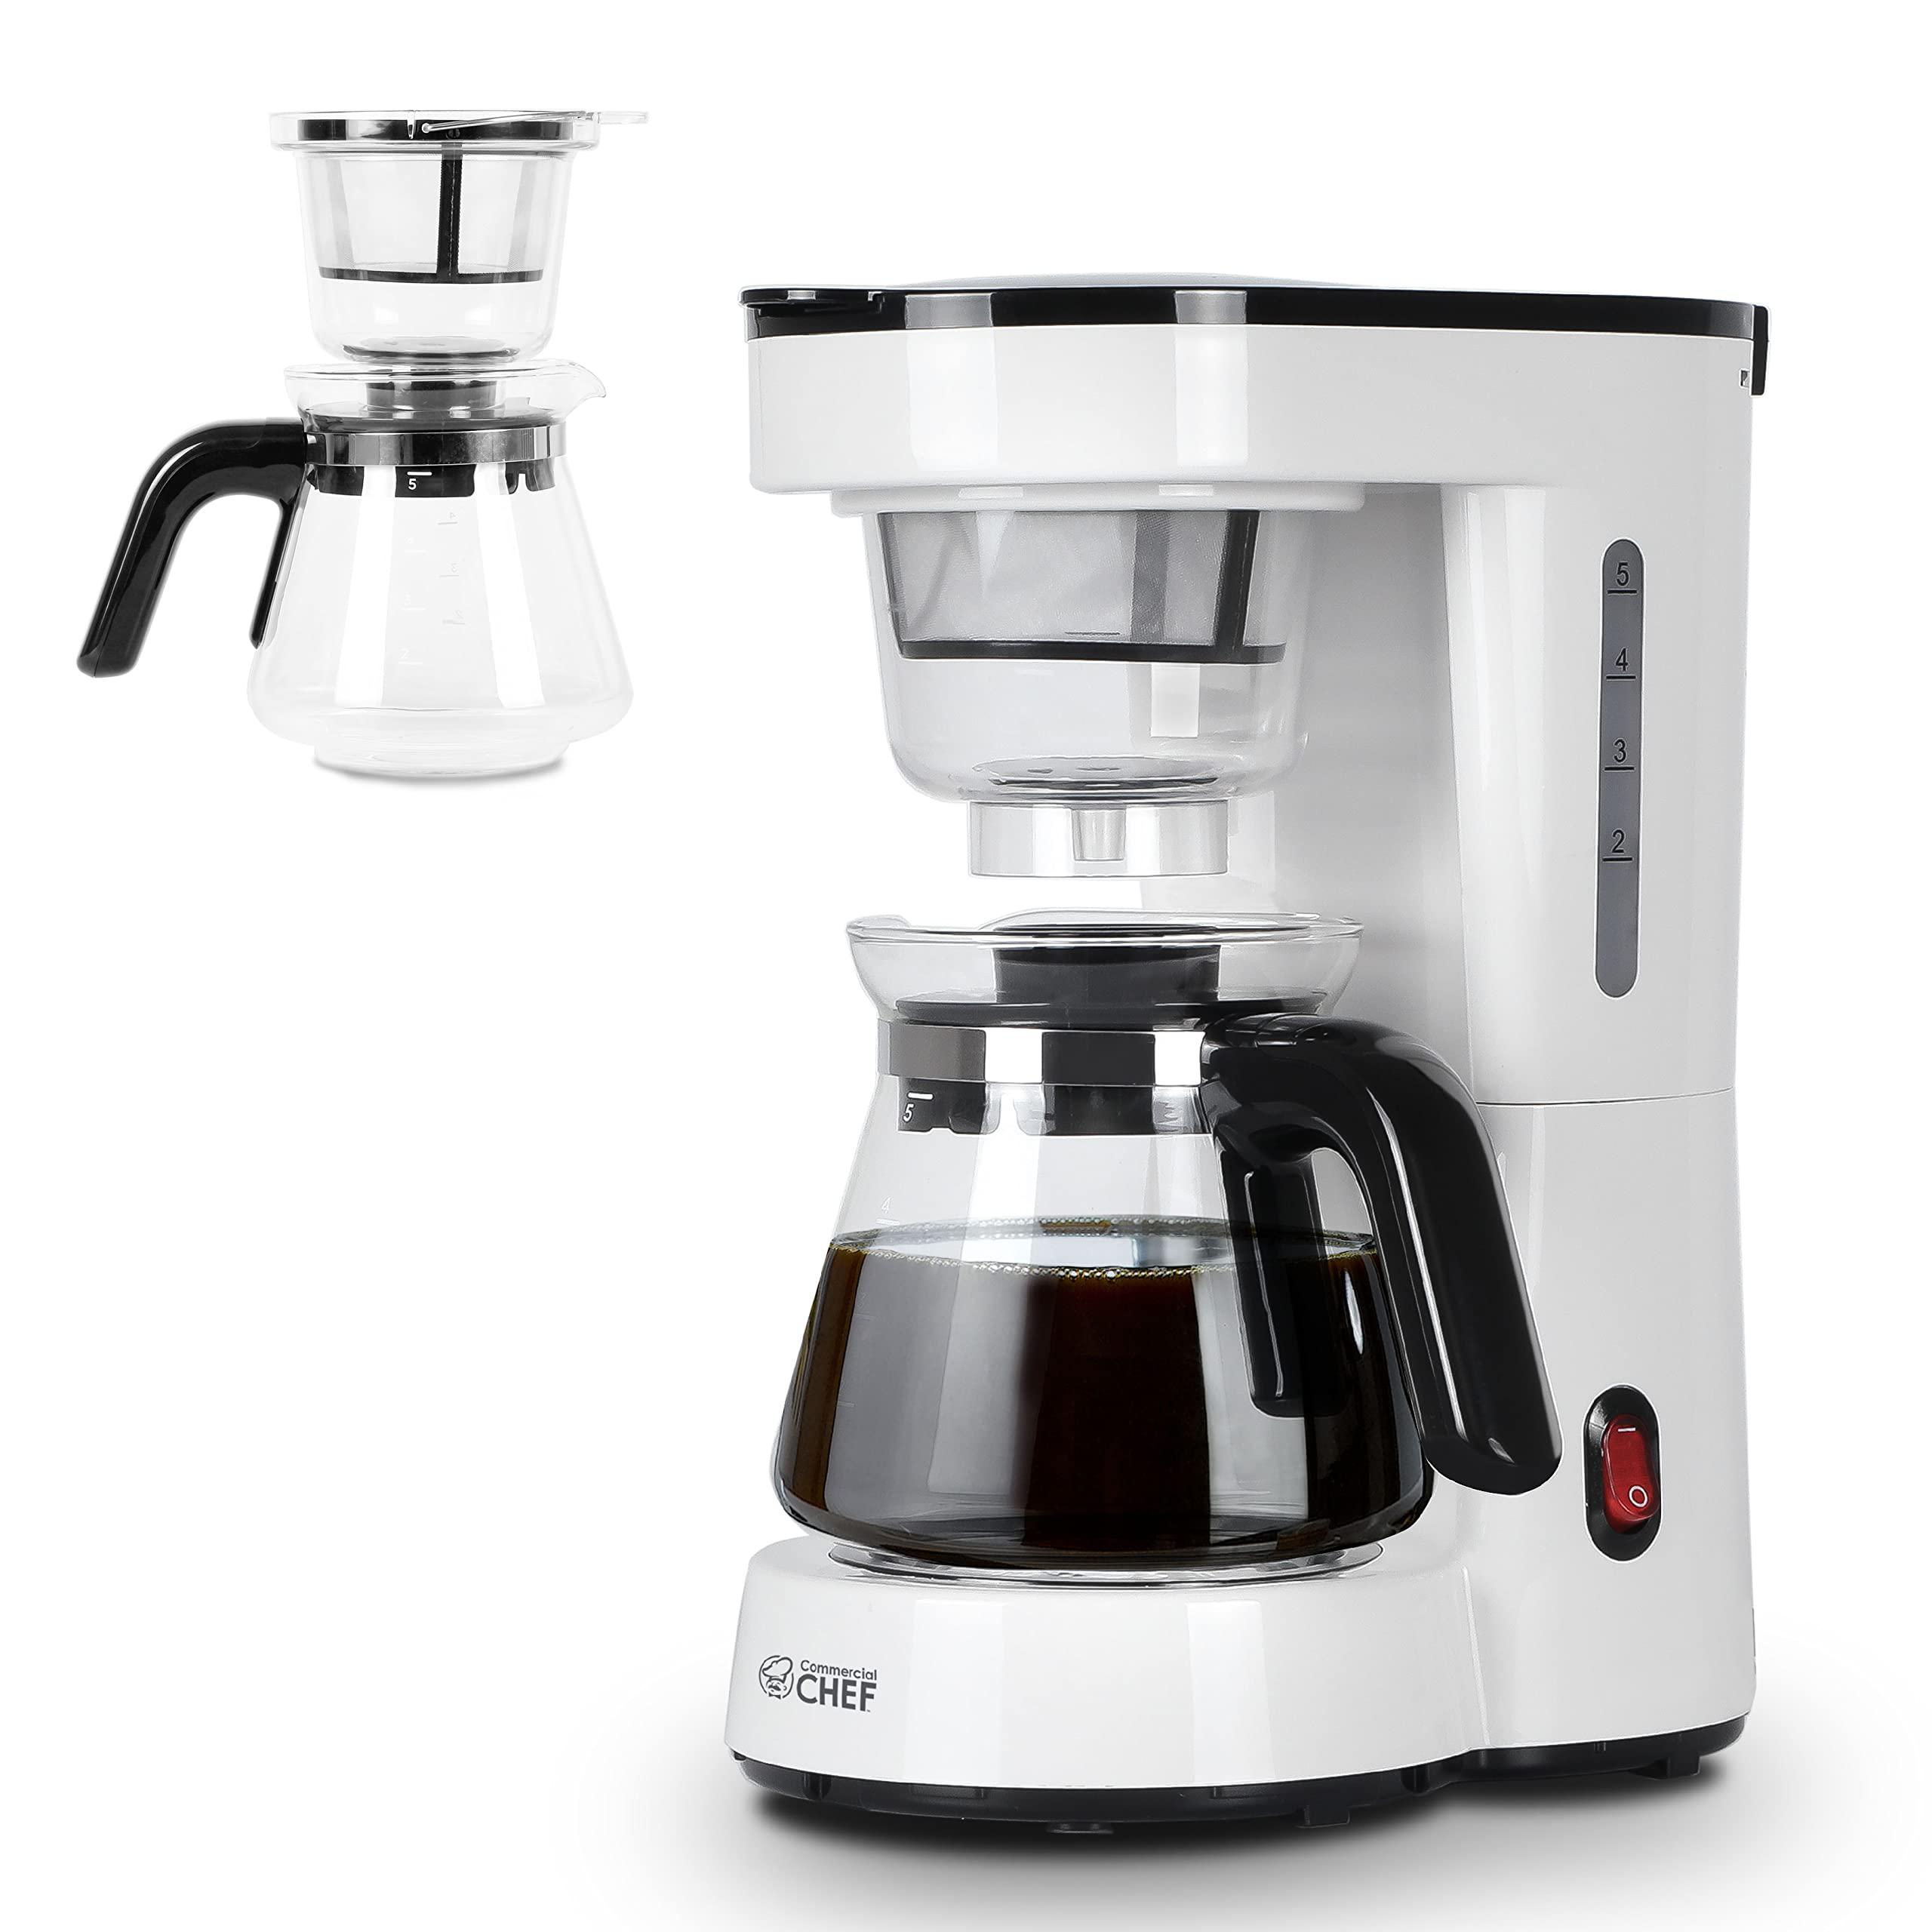 COMMERCIAL CHEF Drip Coffee Maker, 5 Cup Coffee Maker with Pour Over Filter